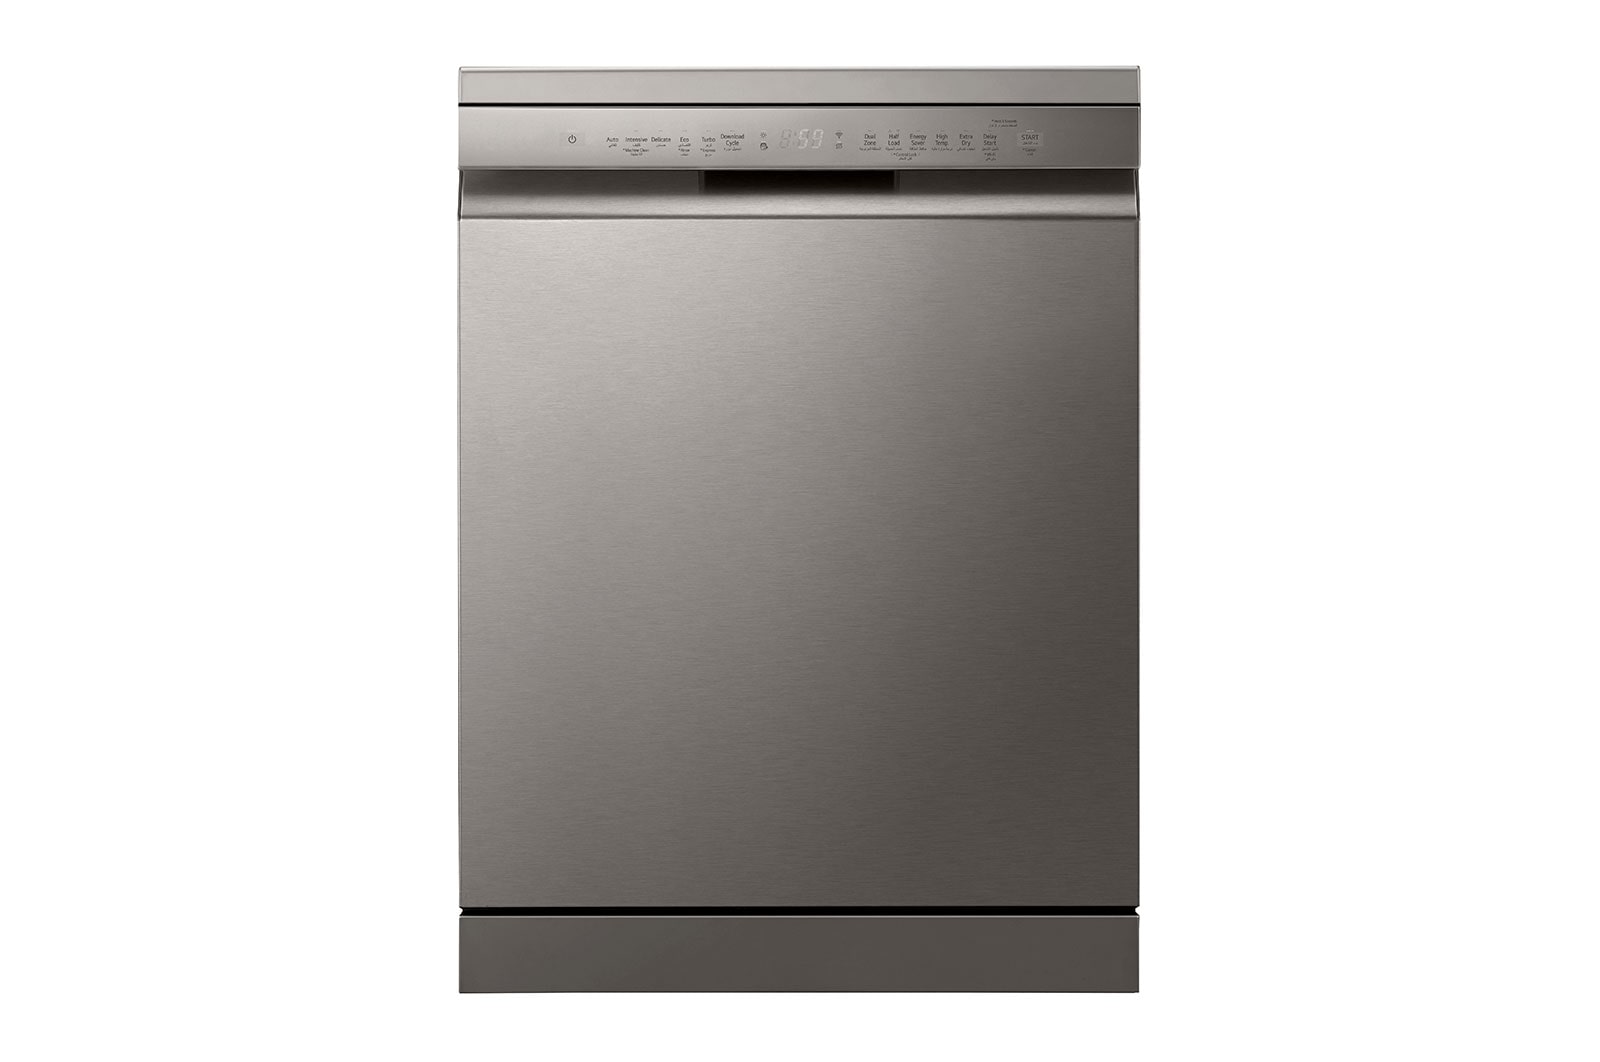 LG 14 Place Setting Dishwasher, Platinum Silver Color,Quad Wash, Easy Rack plus, Less Noise, Dual zone Wash, Turbo Cycle,Inverter Direct Drive Motor,Smart ,ThinQ, DFC415FPE